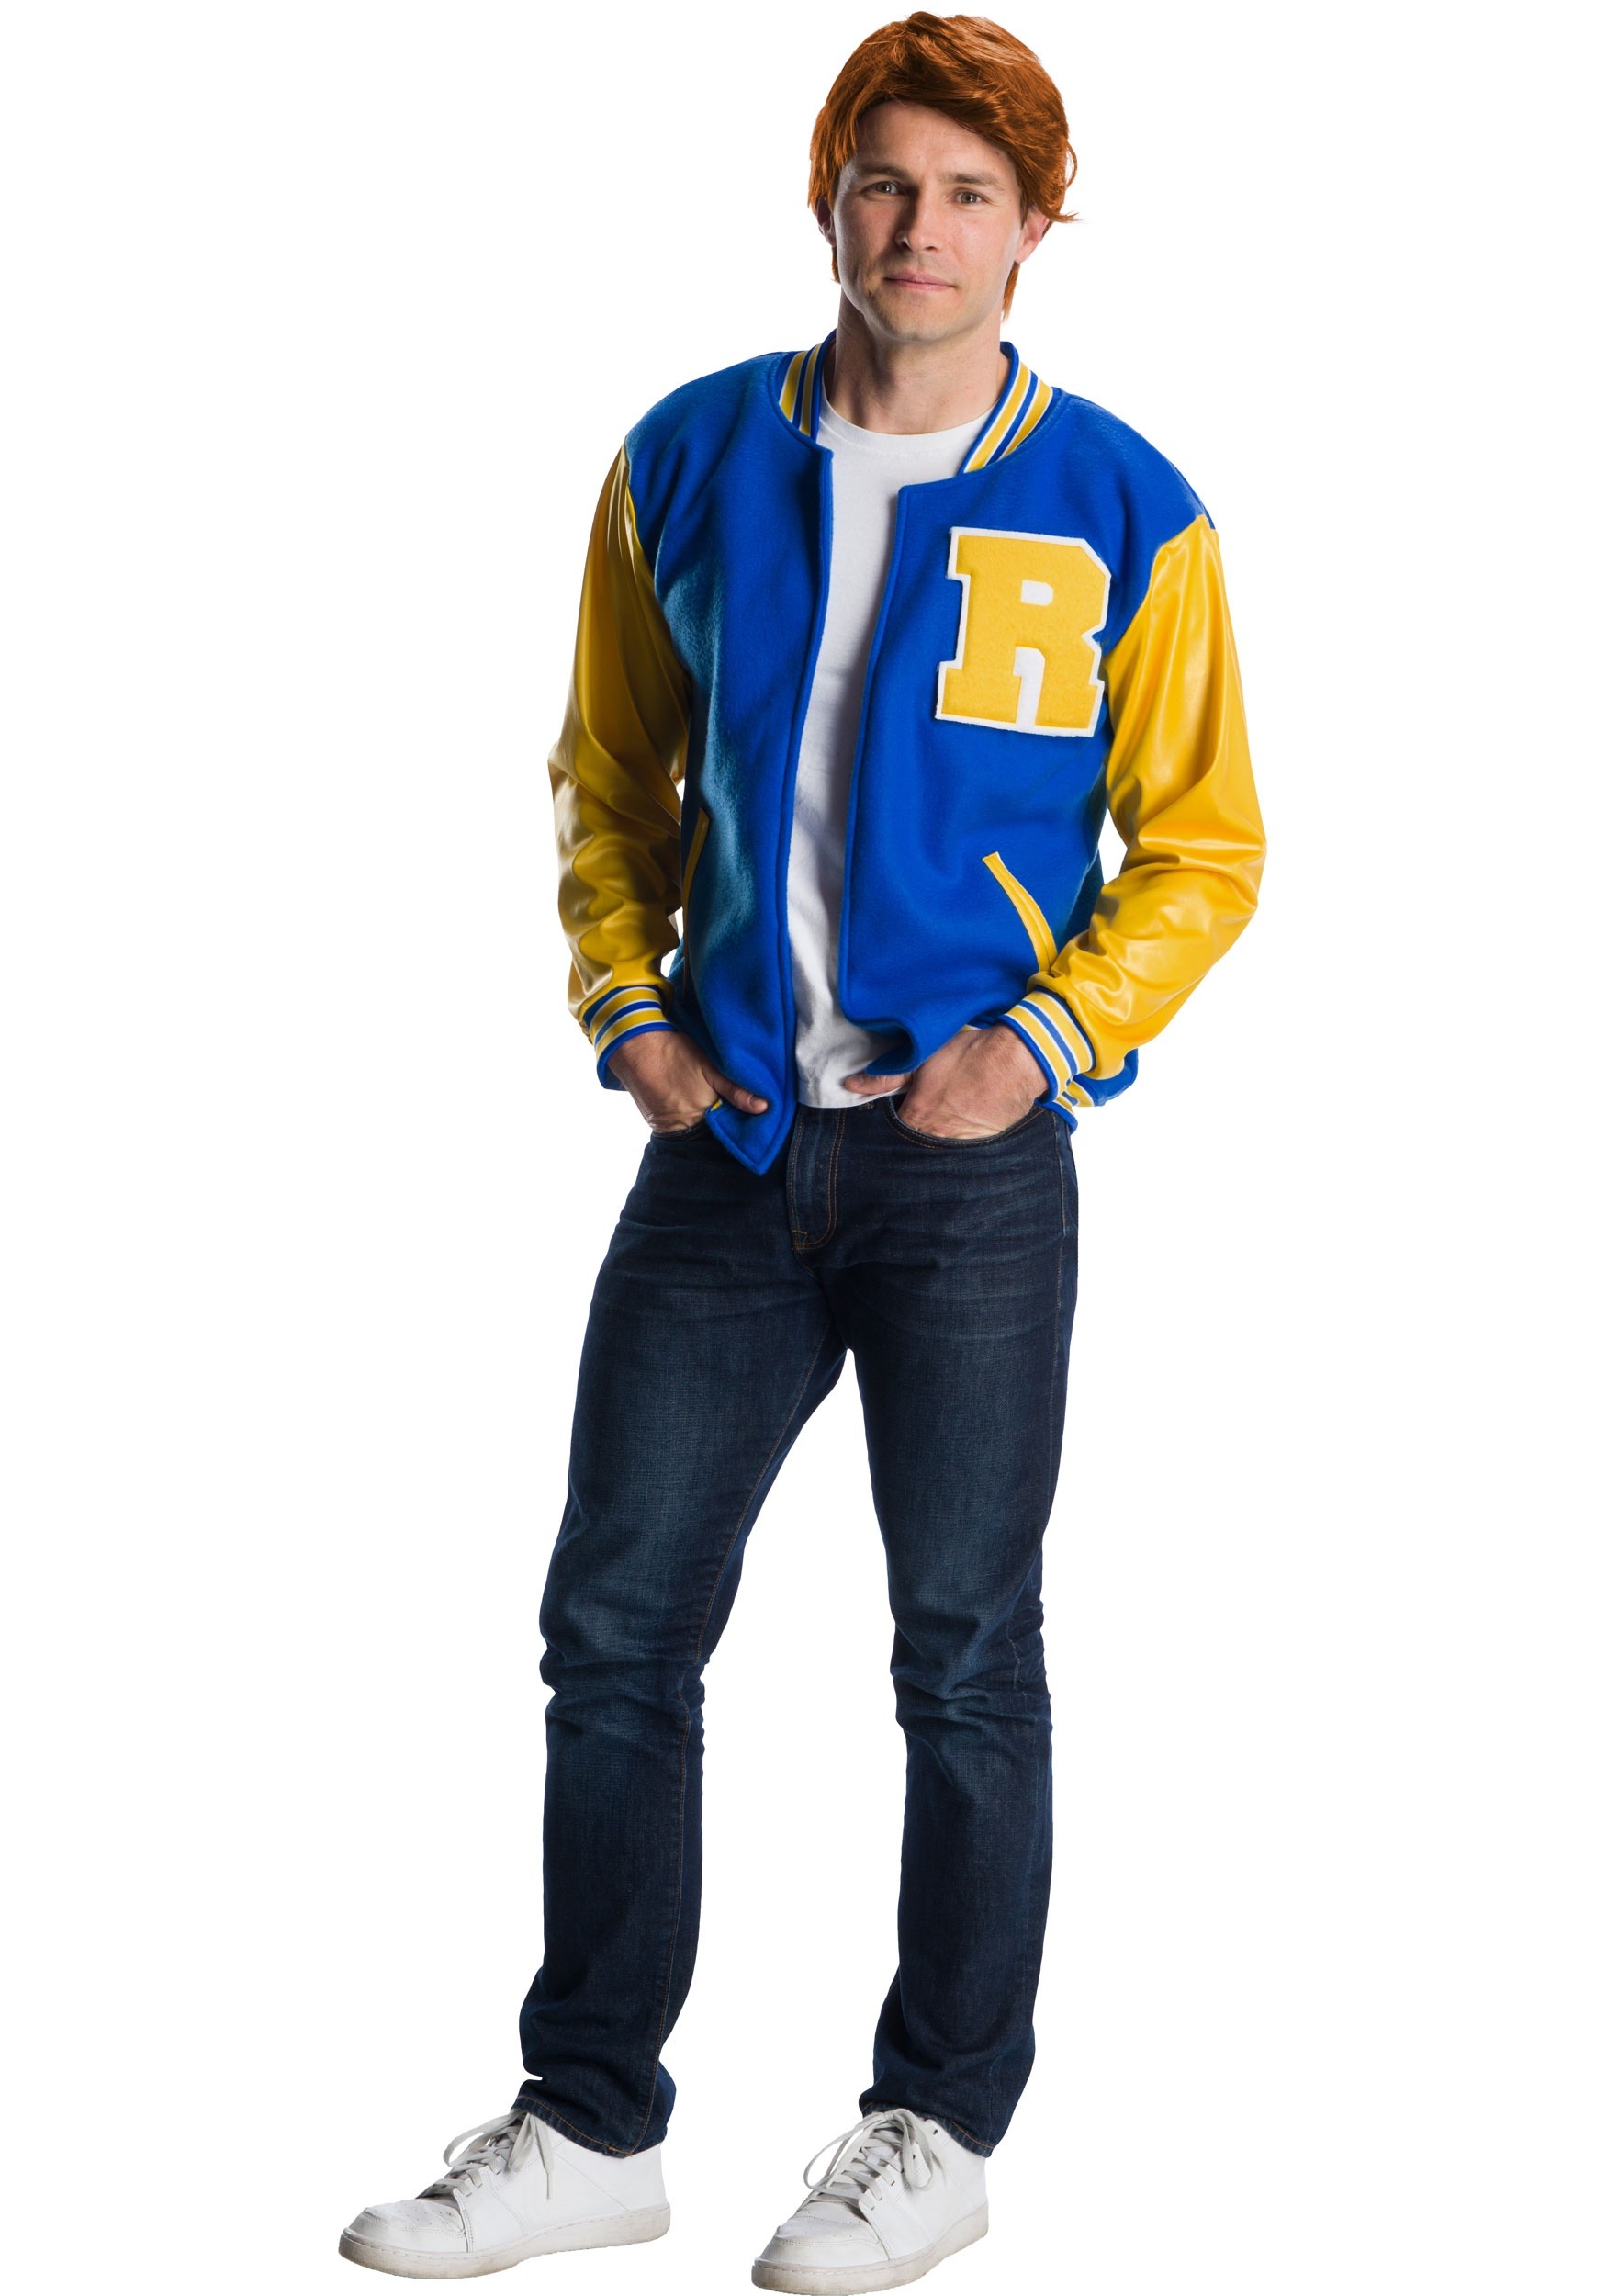 Riverdale Adult Archie Andrews Costume